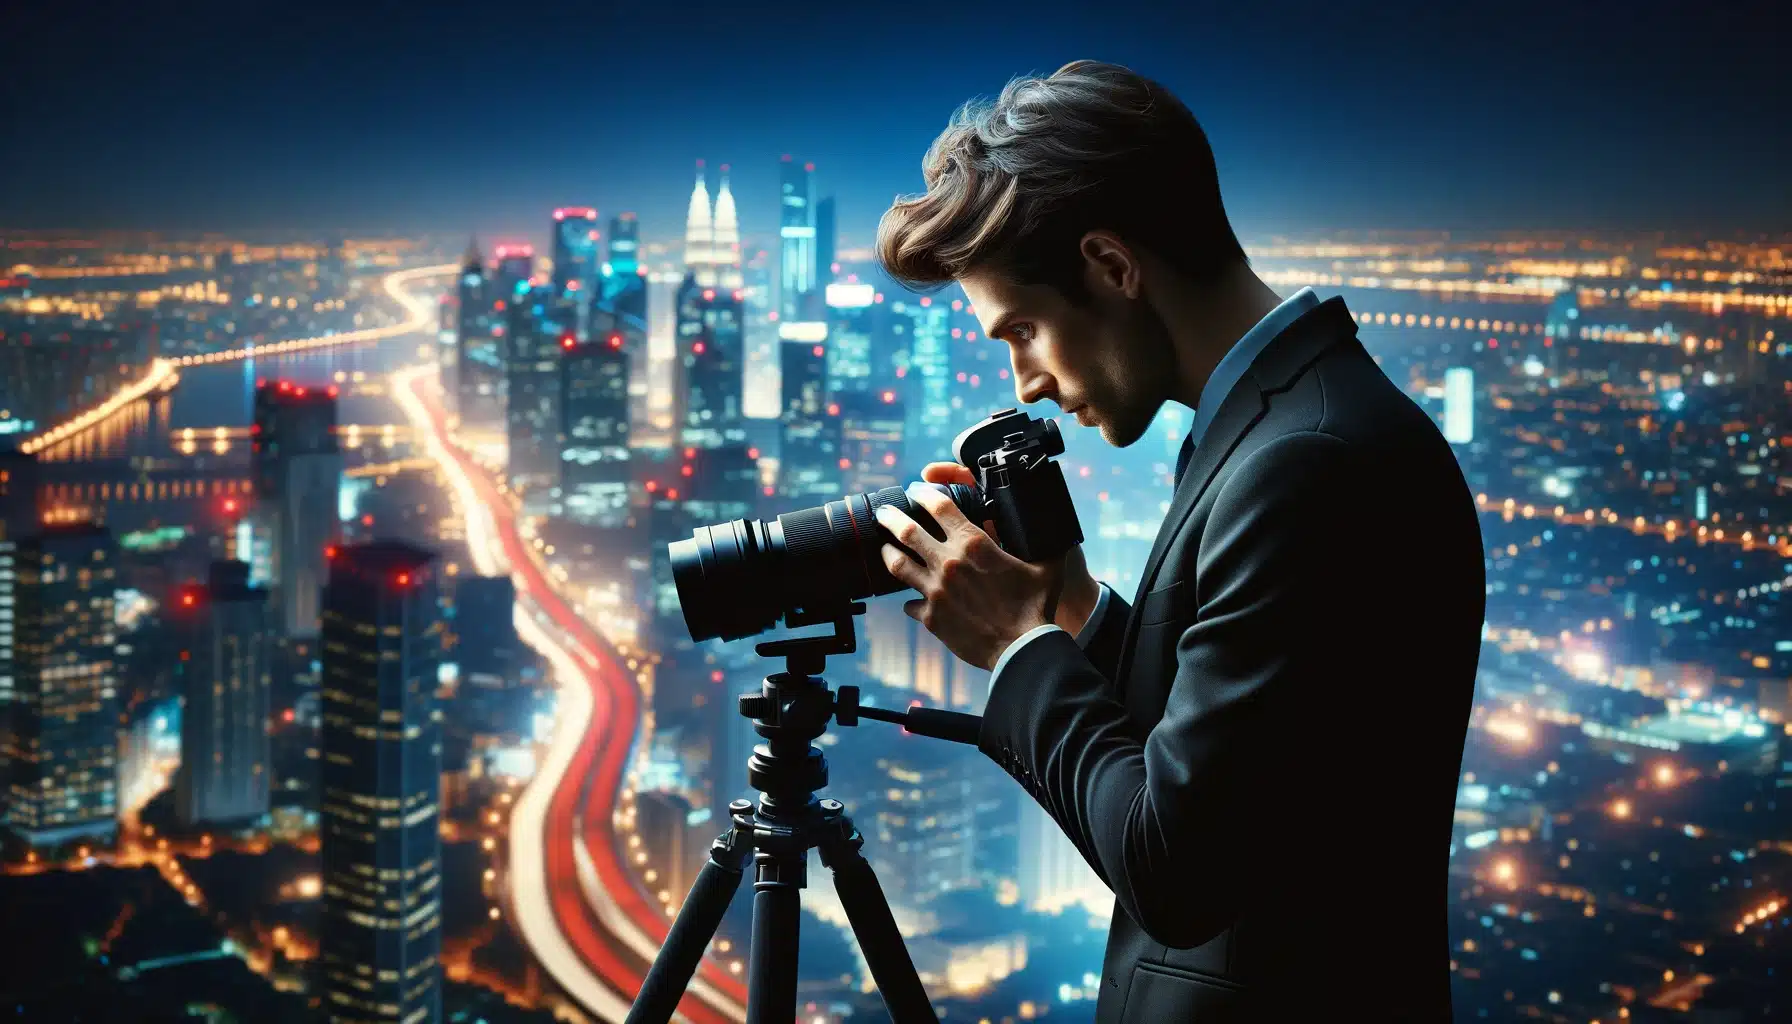 Professional photographer capturing a long exposure of city lights at night from a high viewpoint, using a tripod-mounted camera.